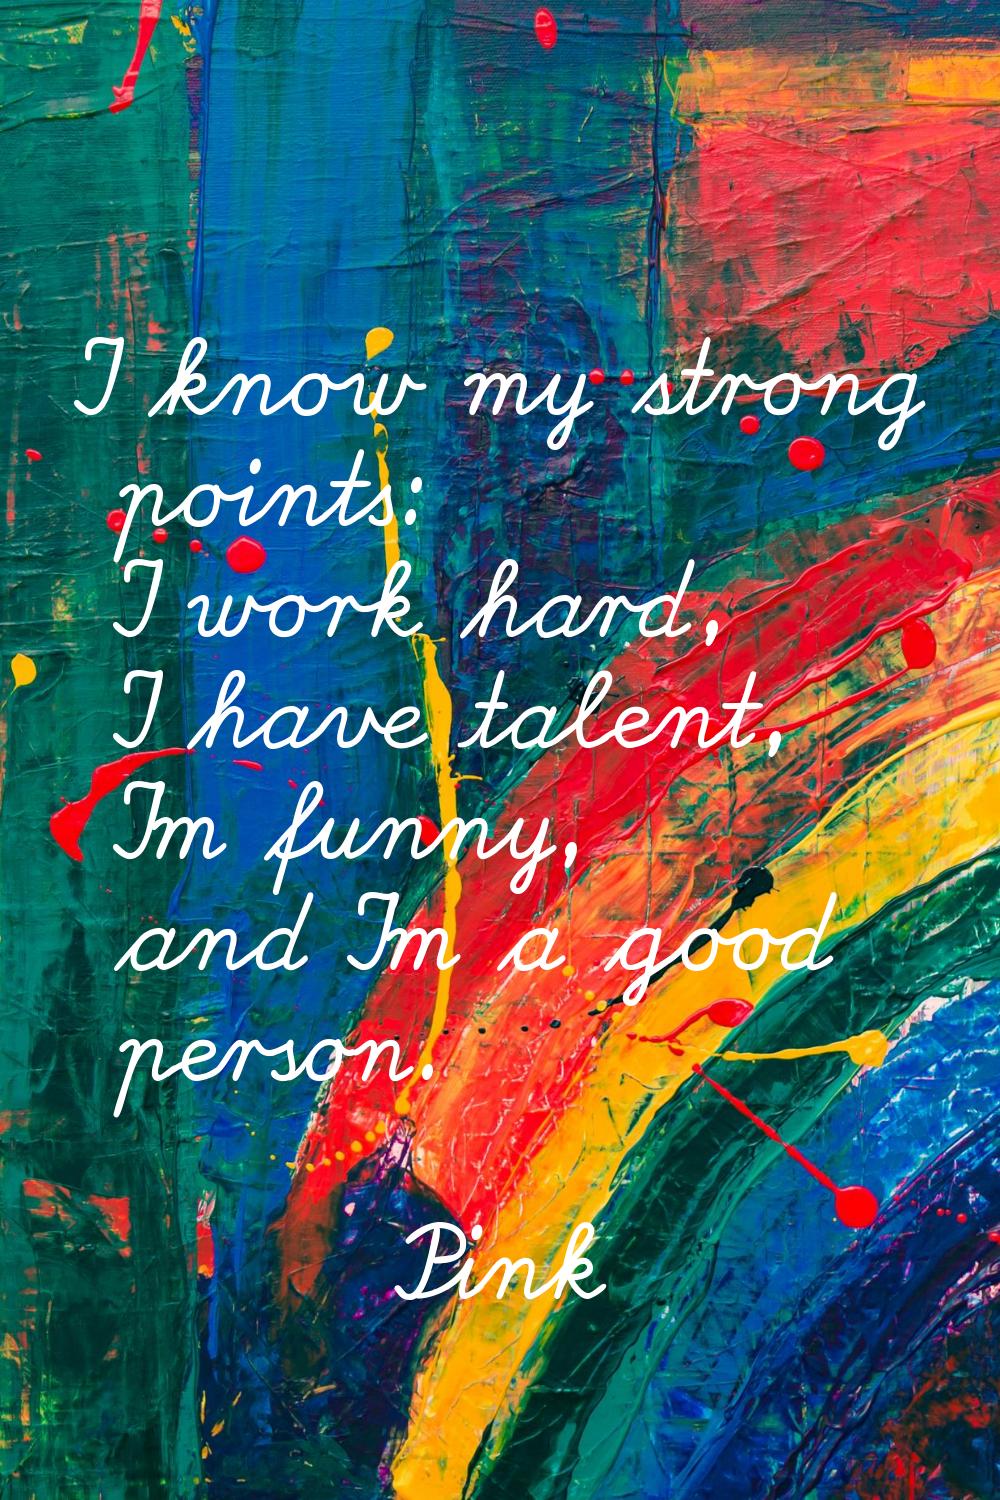 I know my strong points: I work hard, I have talent, I'm funny, and I'm a good person.